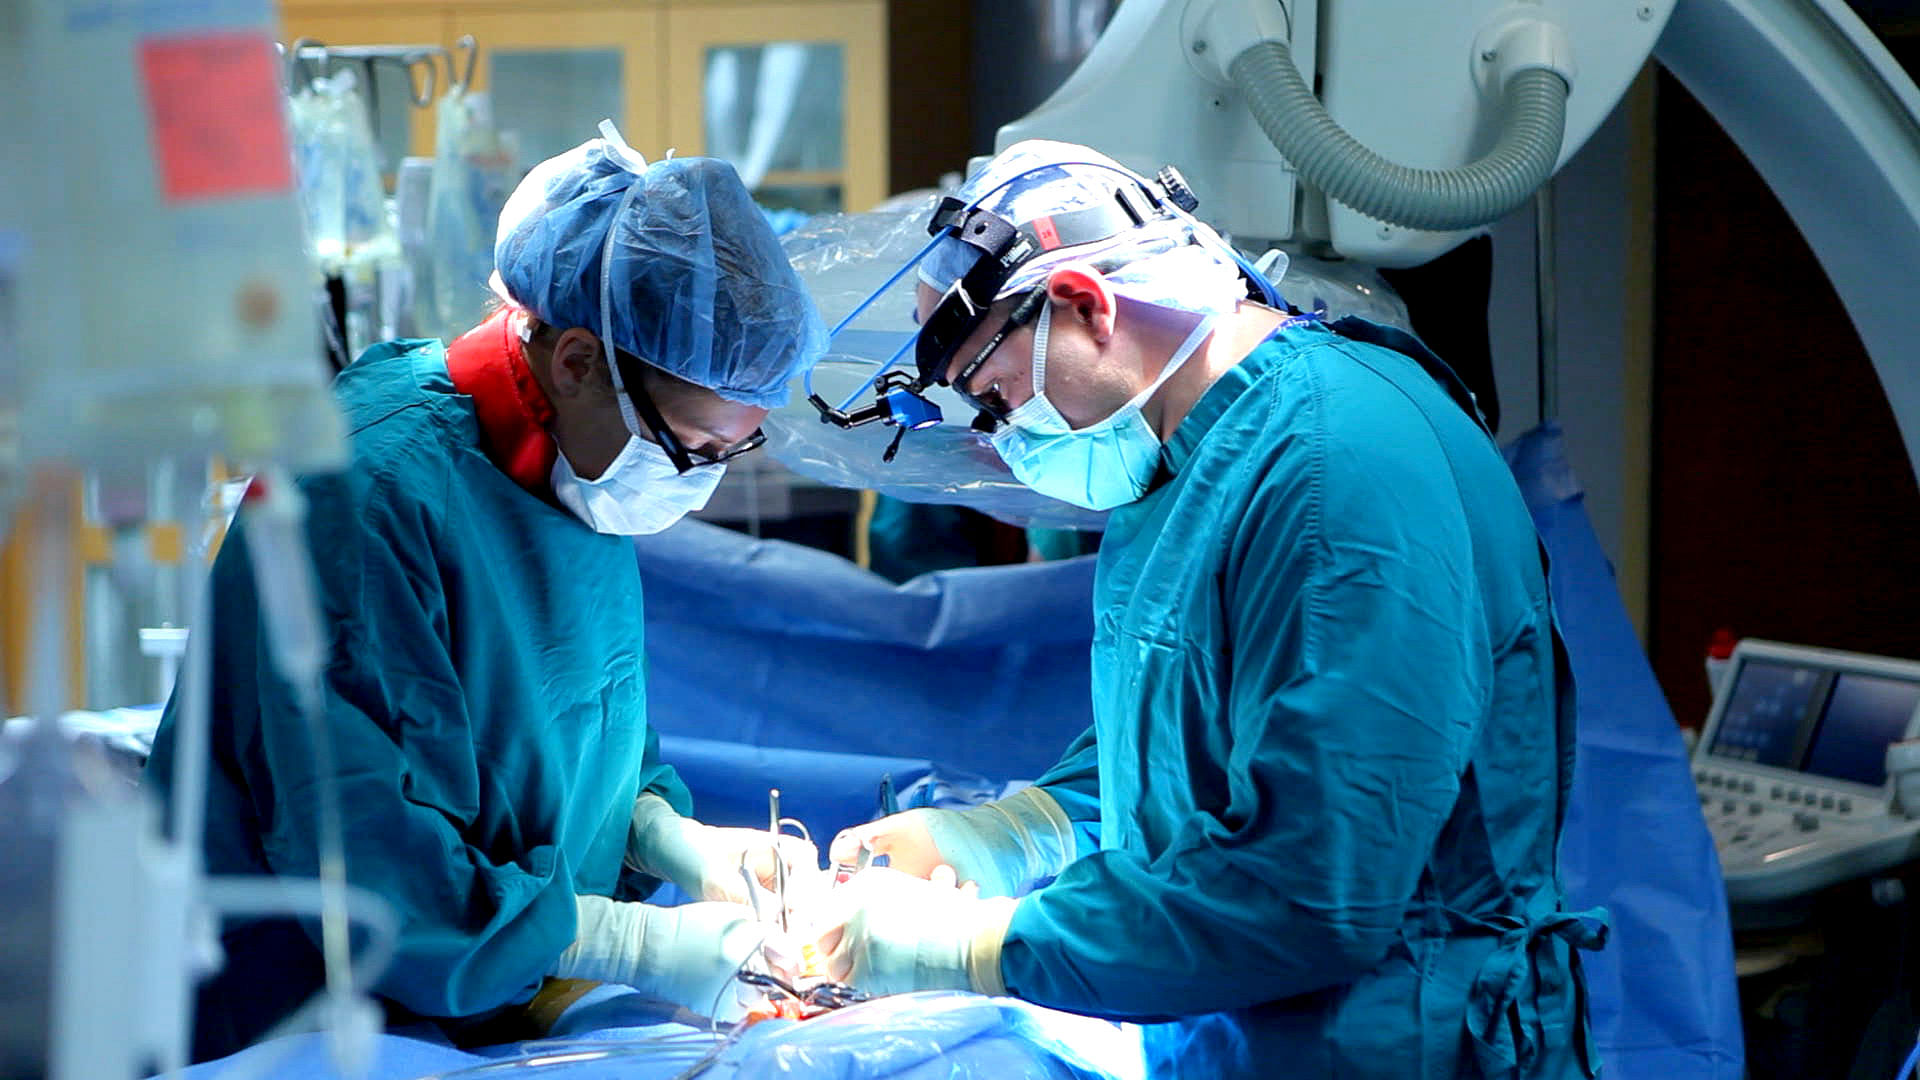 Surgeons used phone torch during brain surgery in chile